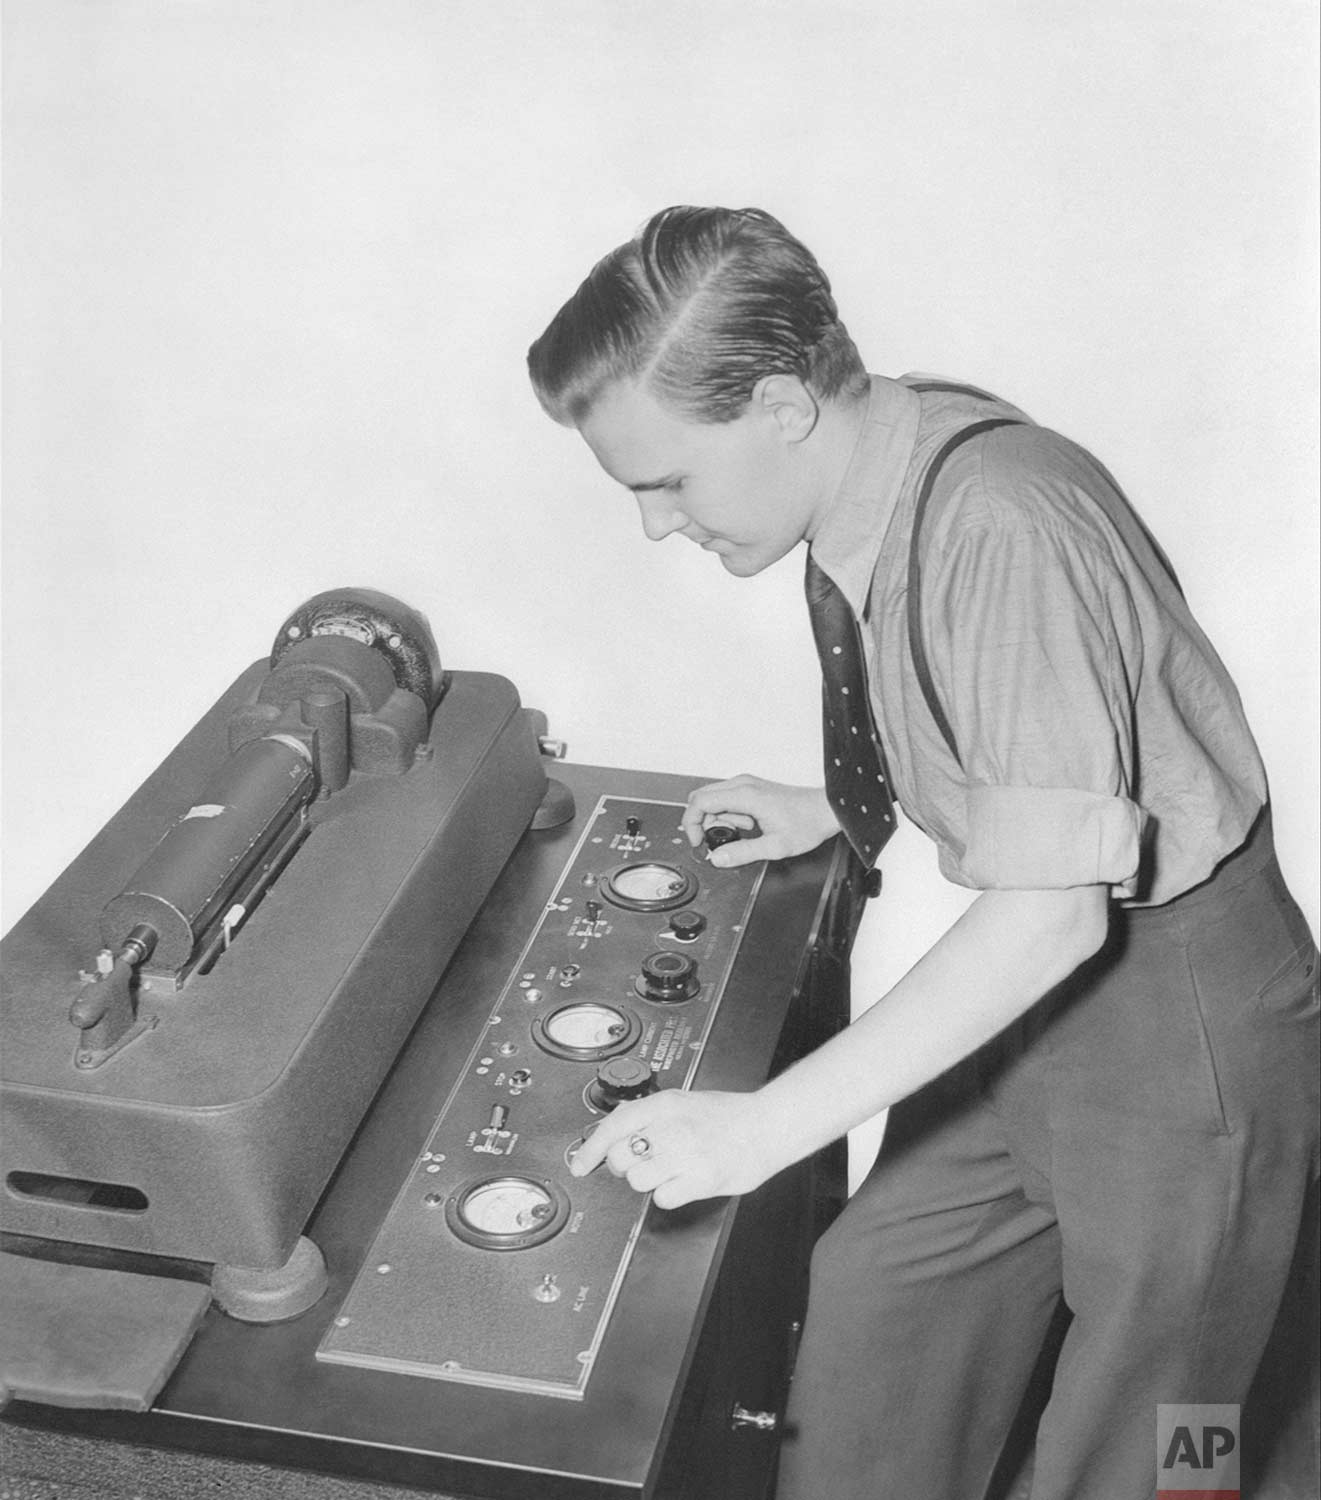  A wirephoto operator for the Associated Press is shown lining up the wirephoto receiver, New York, July 17, 1939.  (AP Photo) 